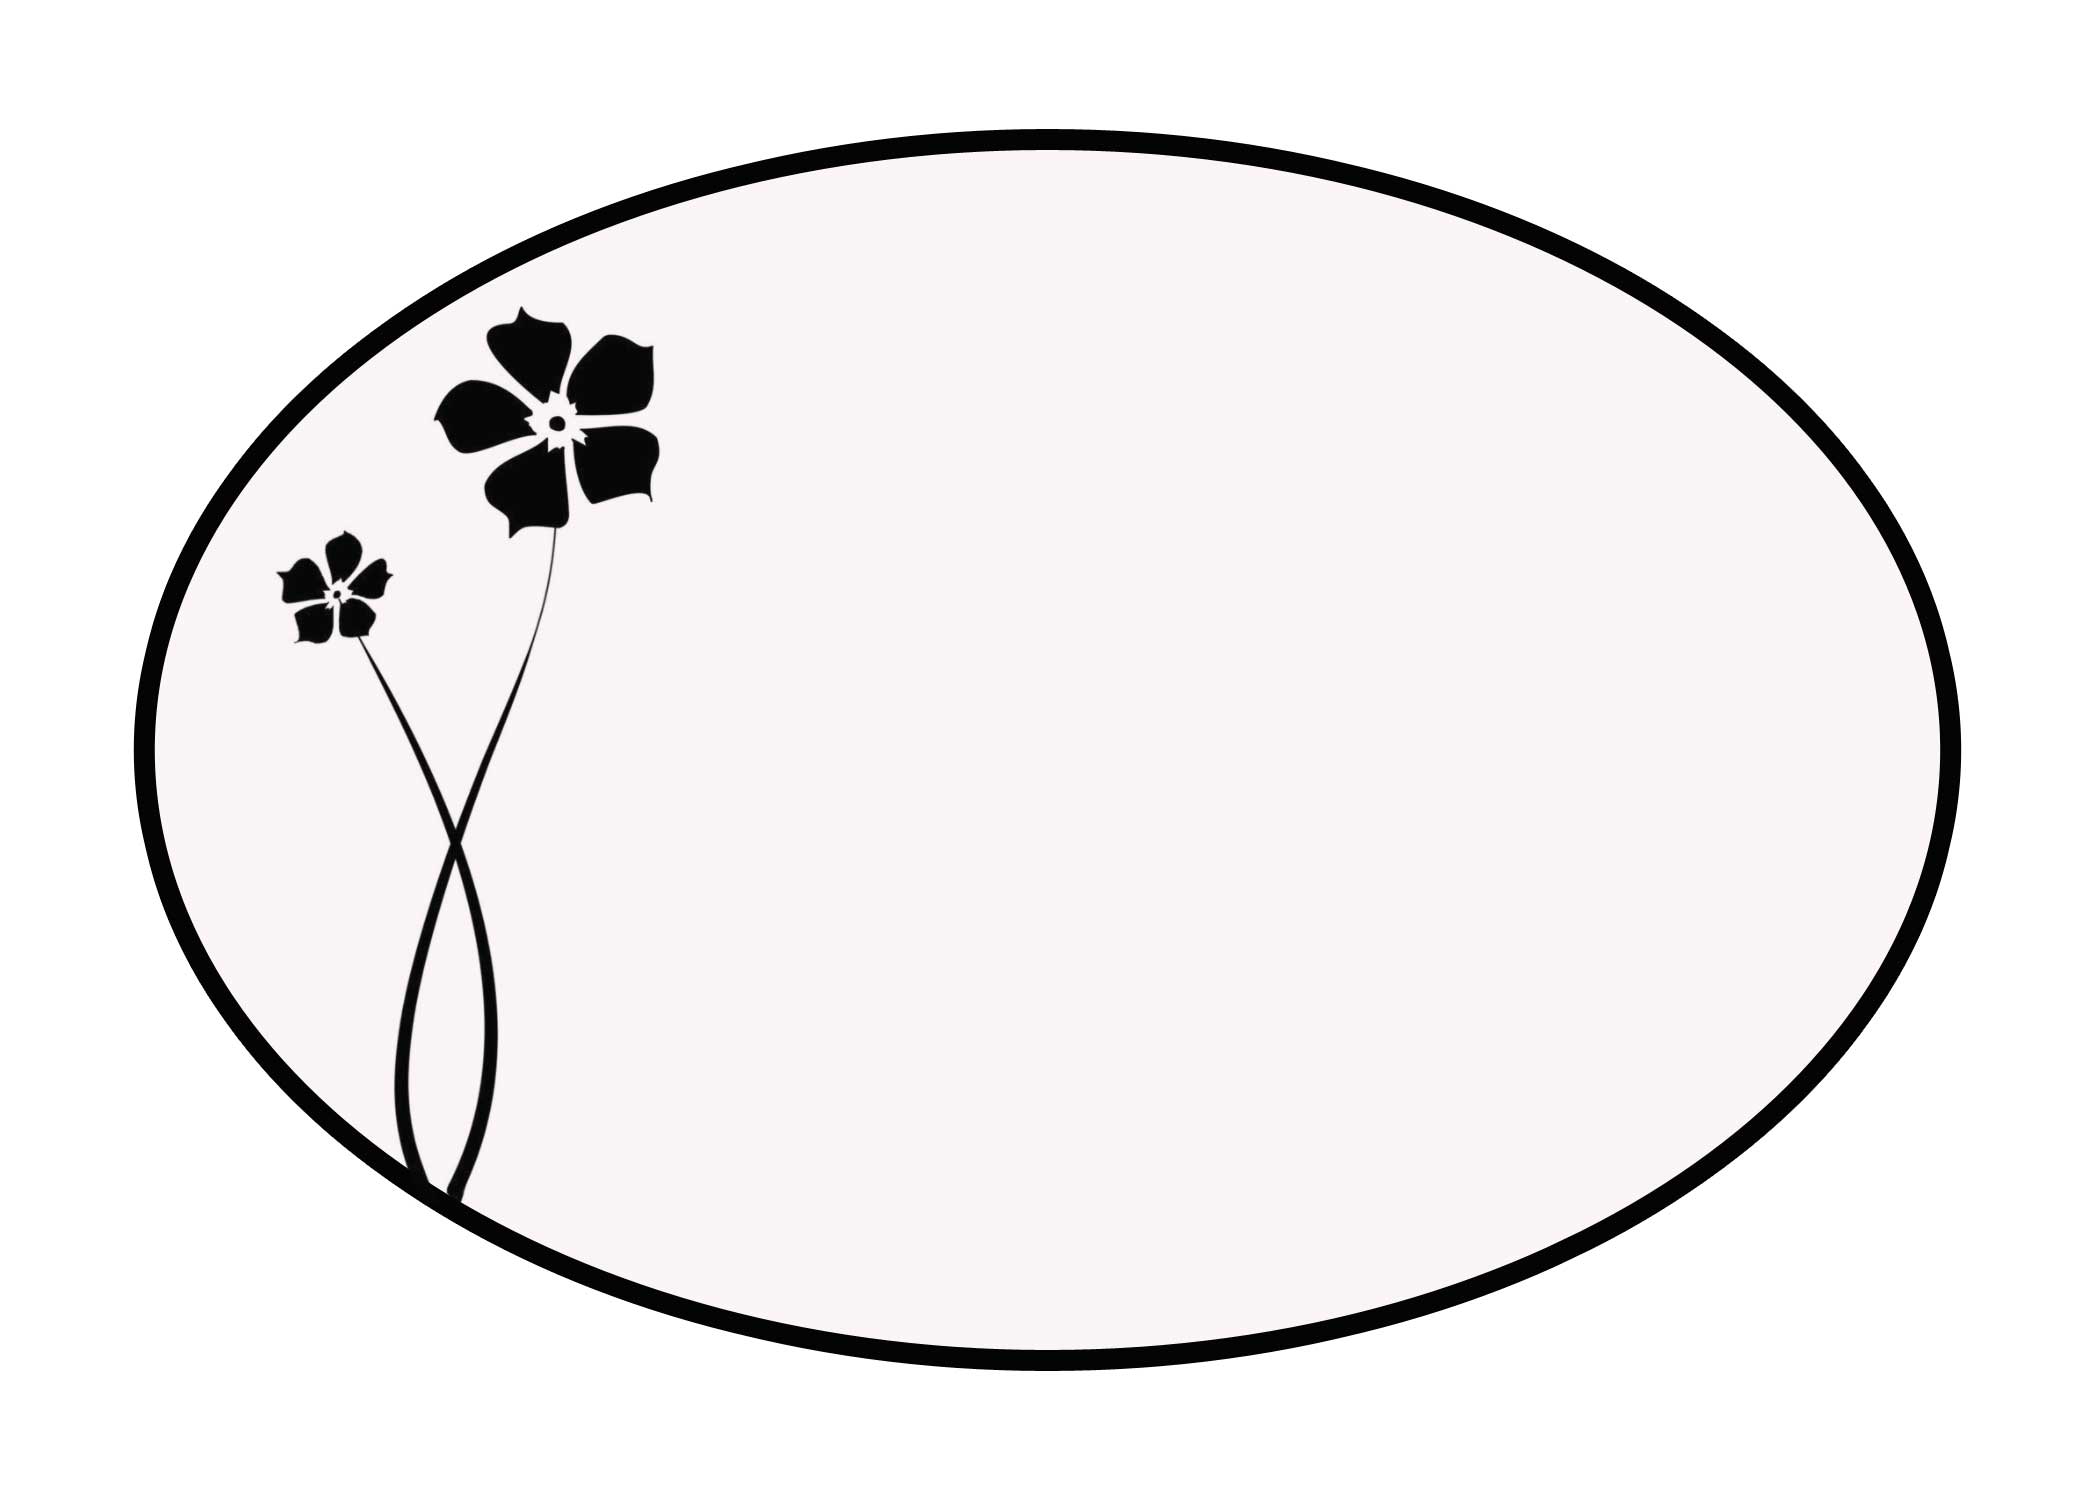 oval clipart ring shape